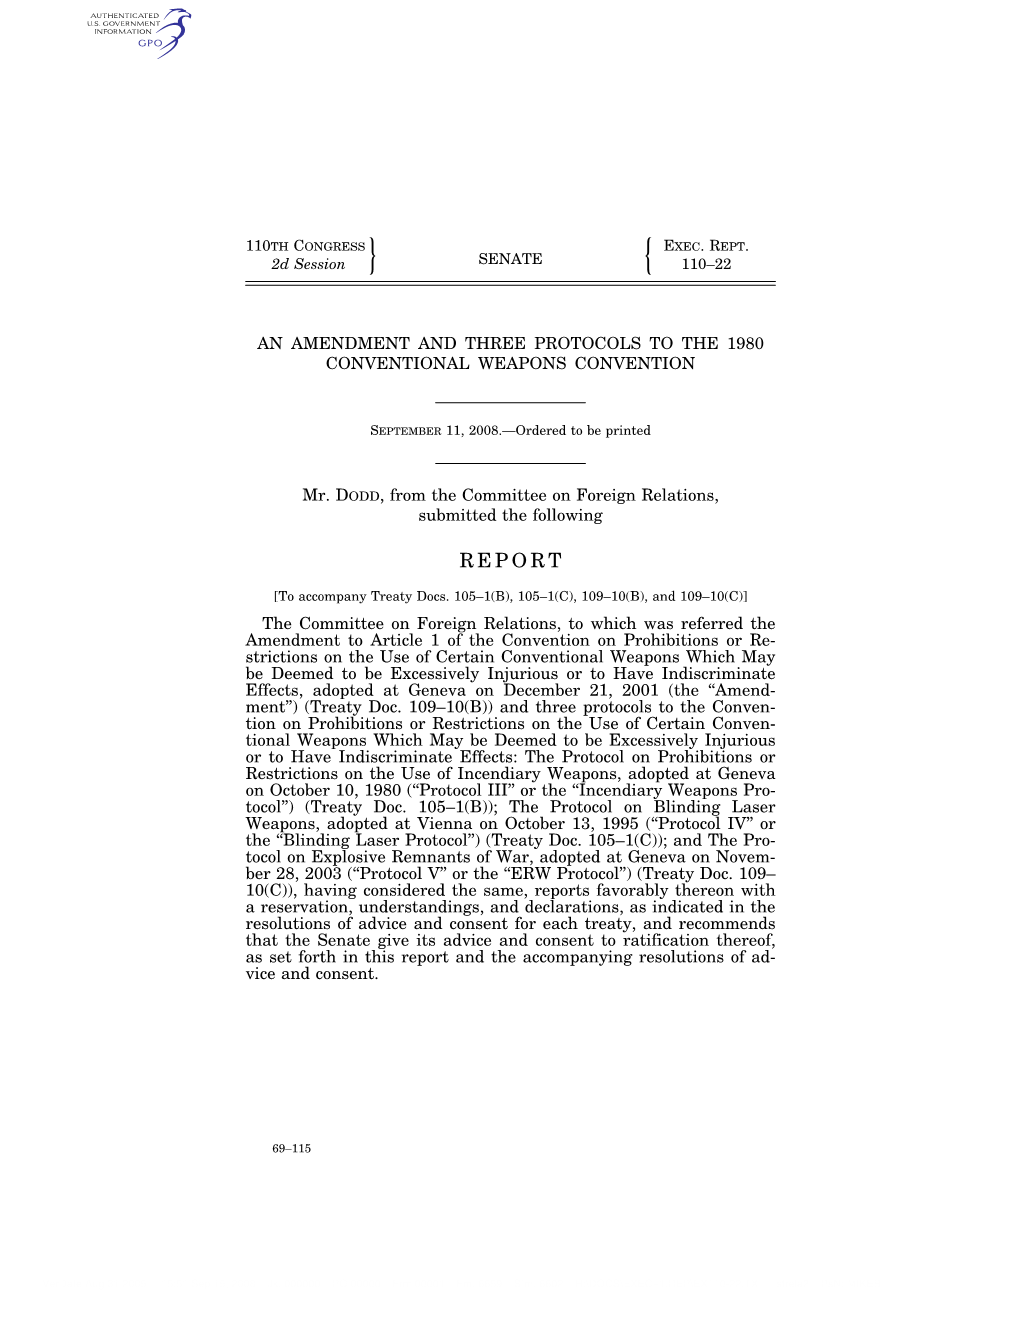 An Amendment and Three Protocols to the 1980 Conventional Weapons Convention